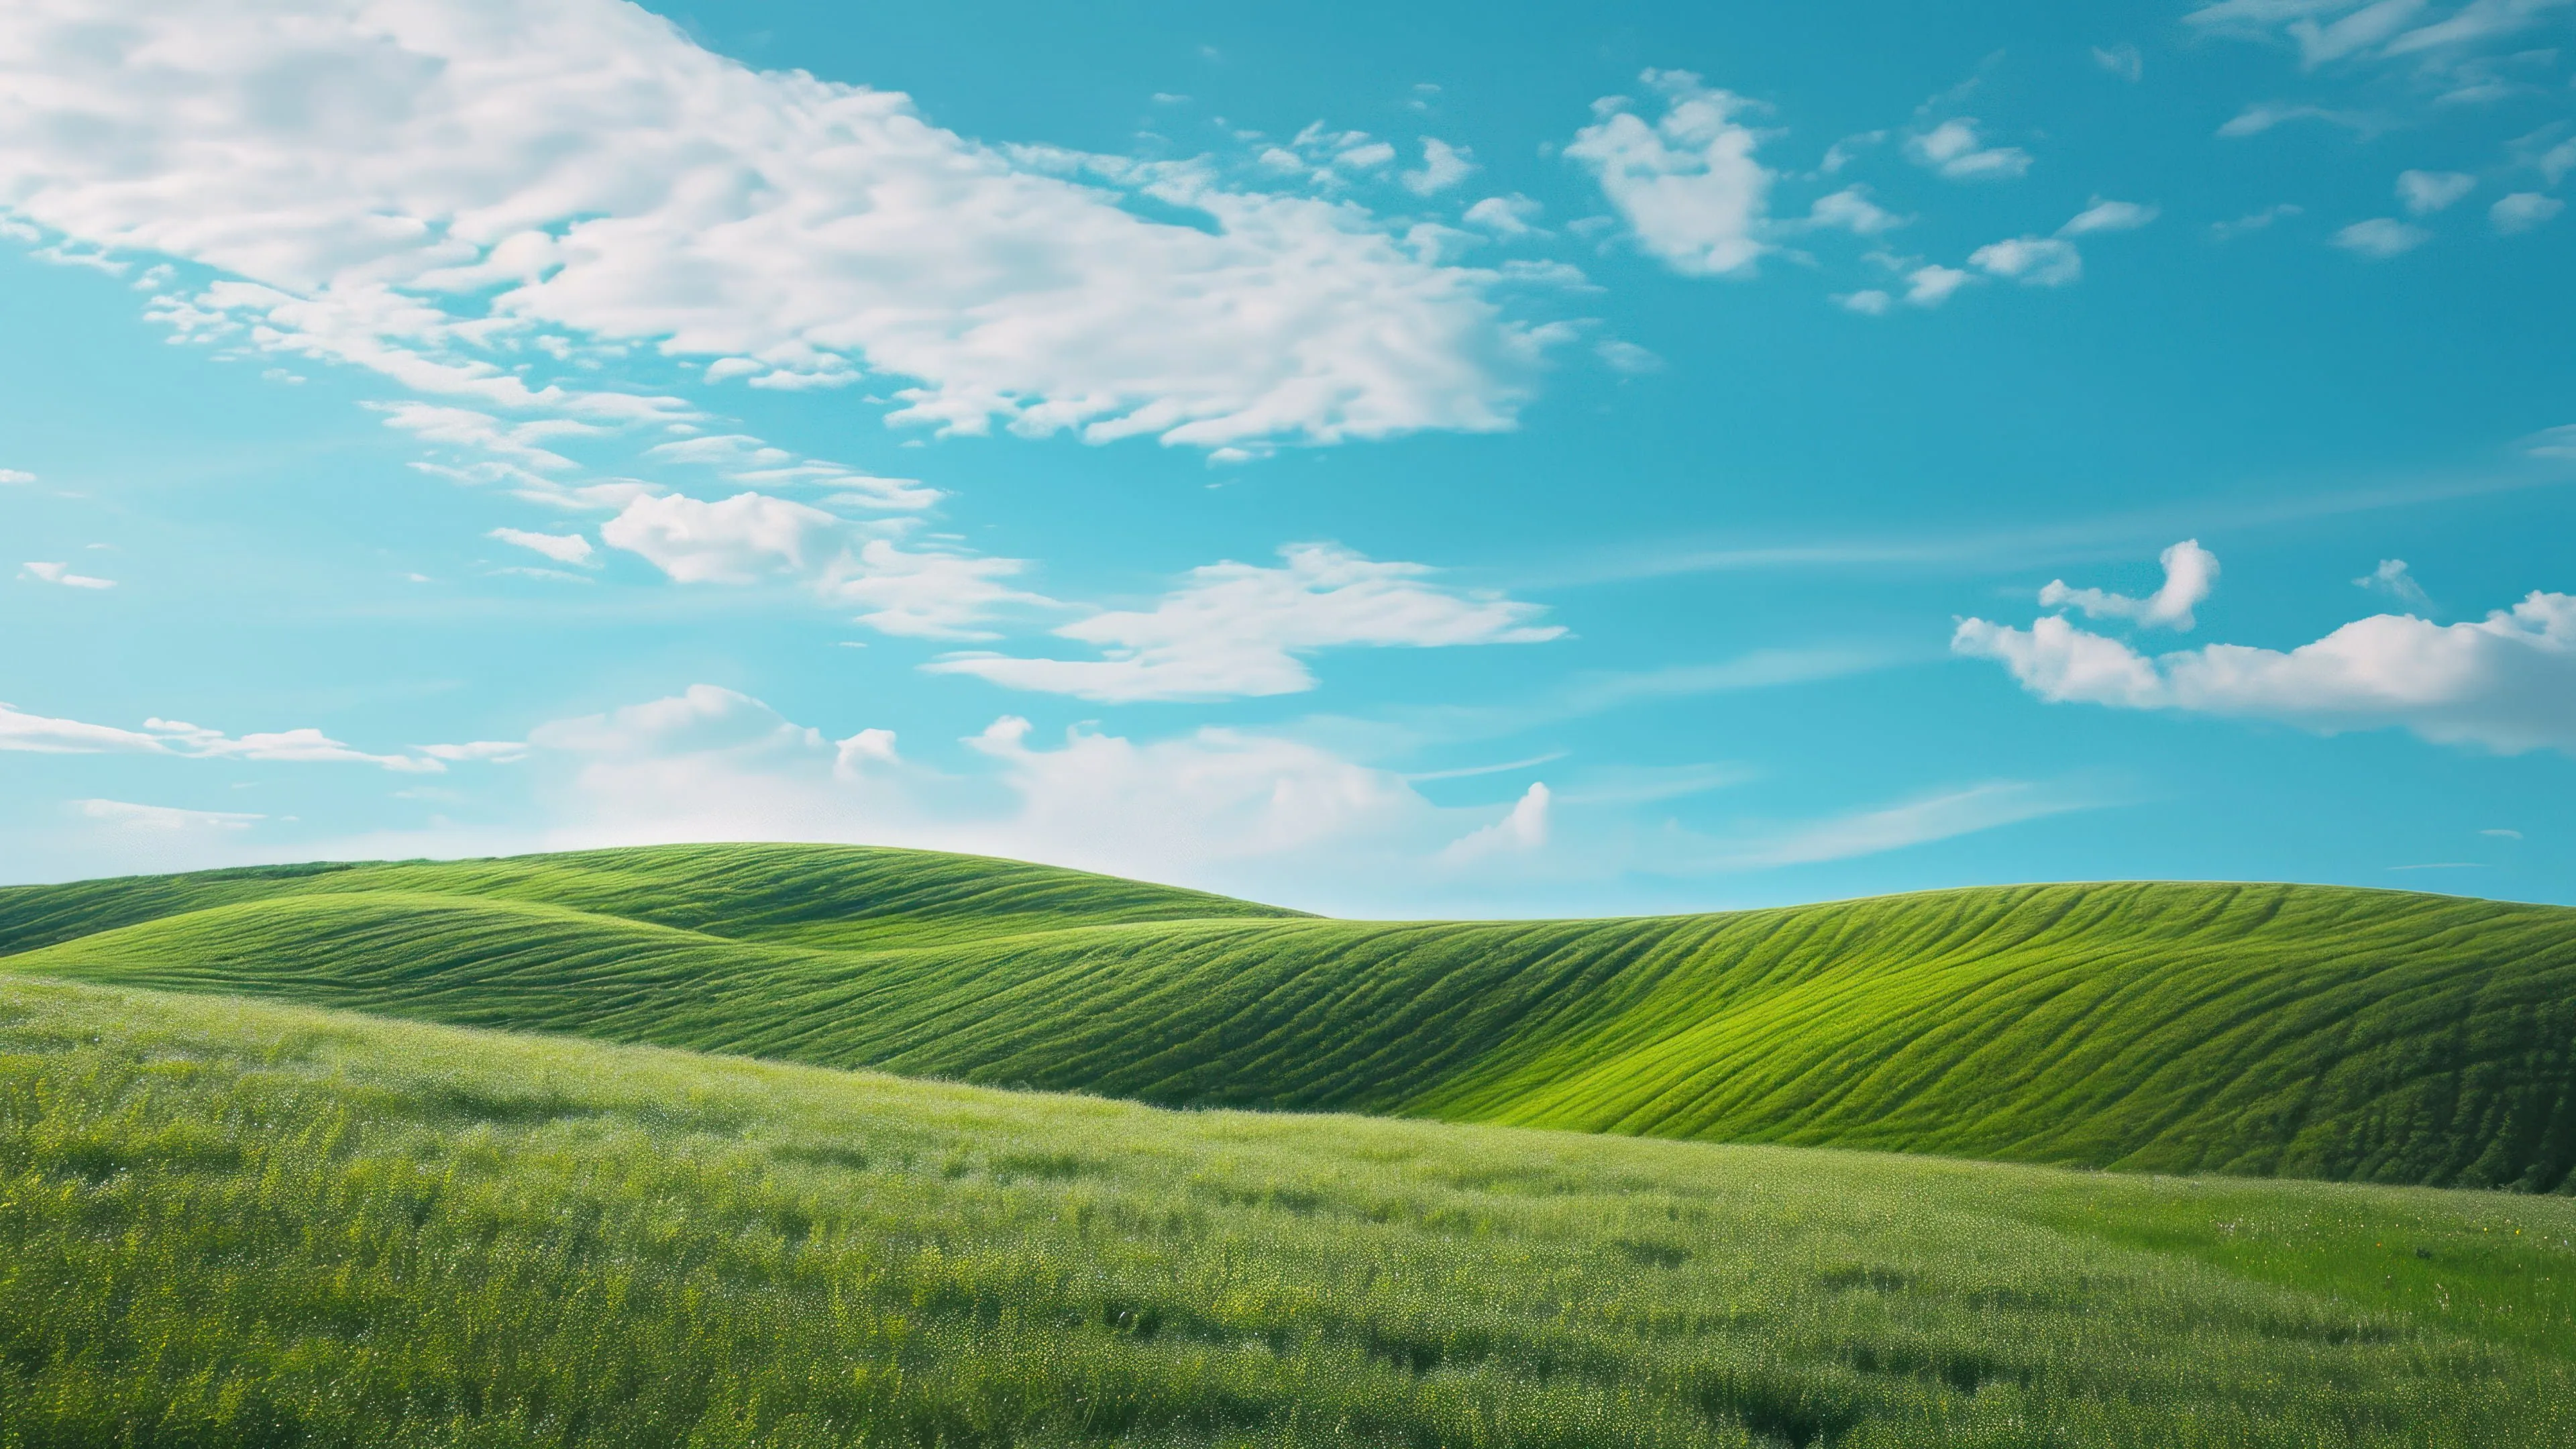 A nostalgic 4K wallpaper reminiscent of the iconic Windows XP era, beautifully reimagined through AI generation. The digital artwork captures the essence of vintage computing with a modern twist, making it a classic yet contemporary choice for your desktop background.